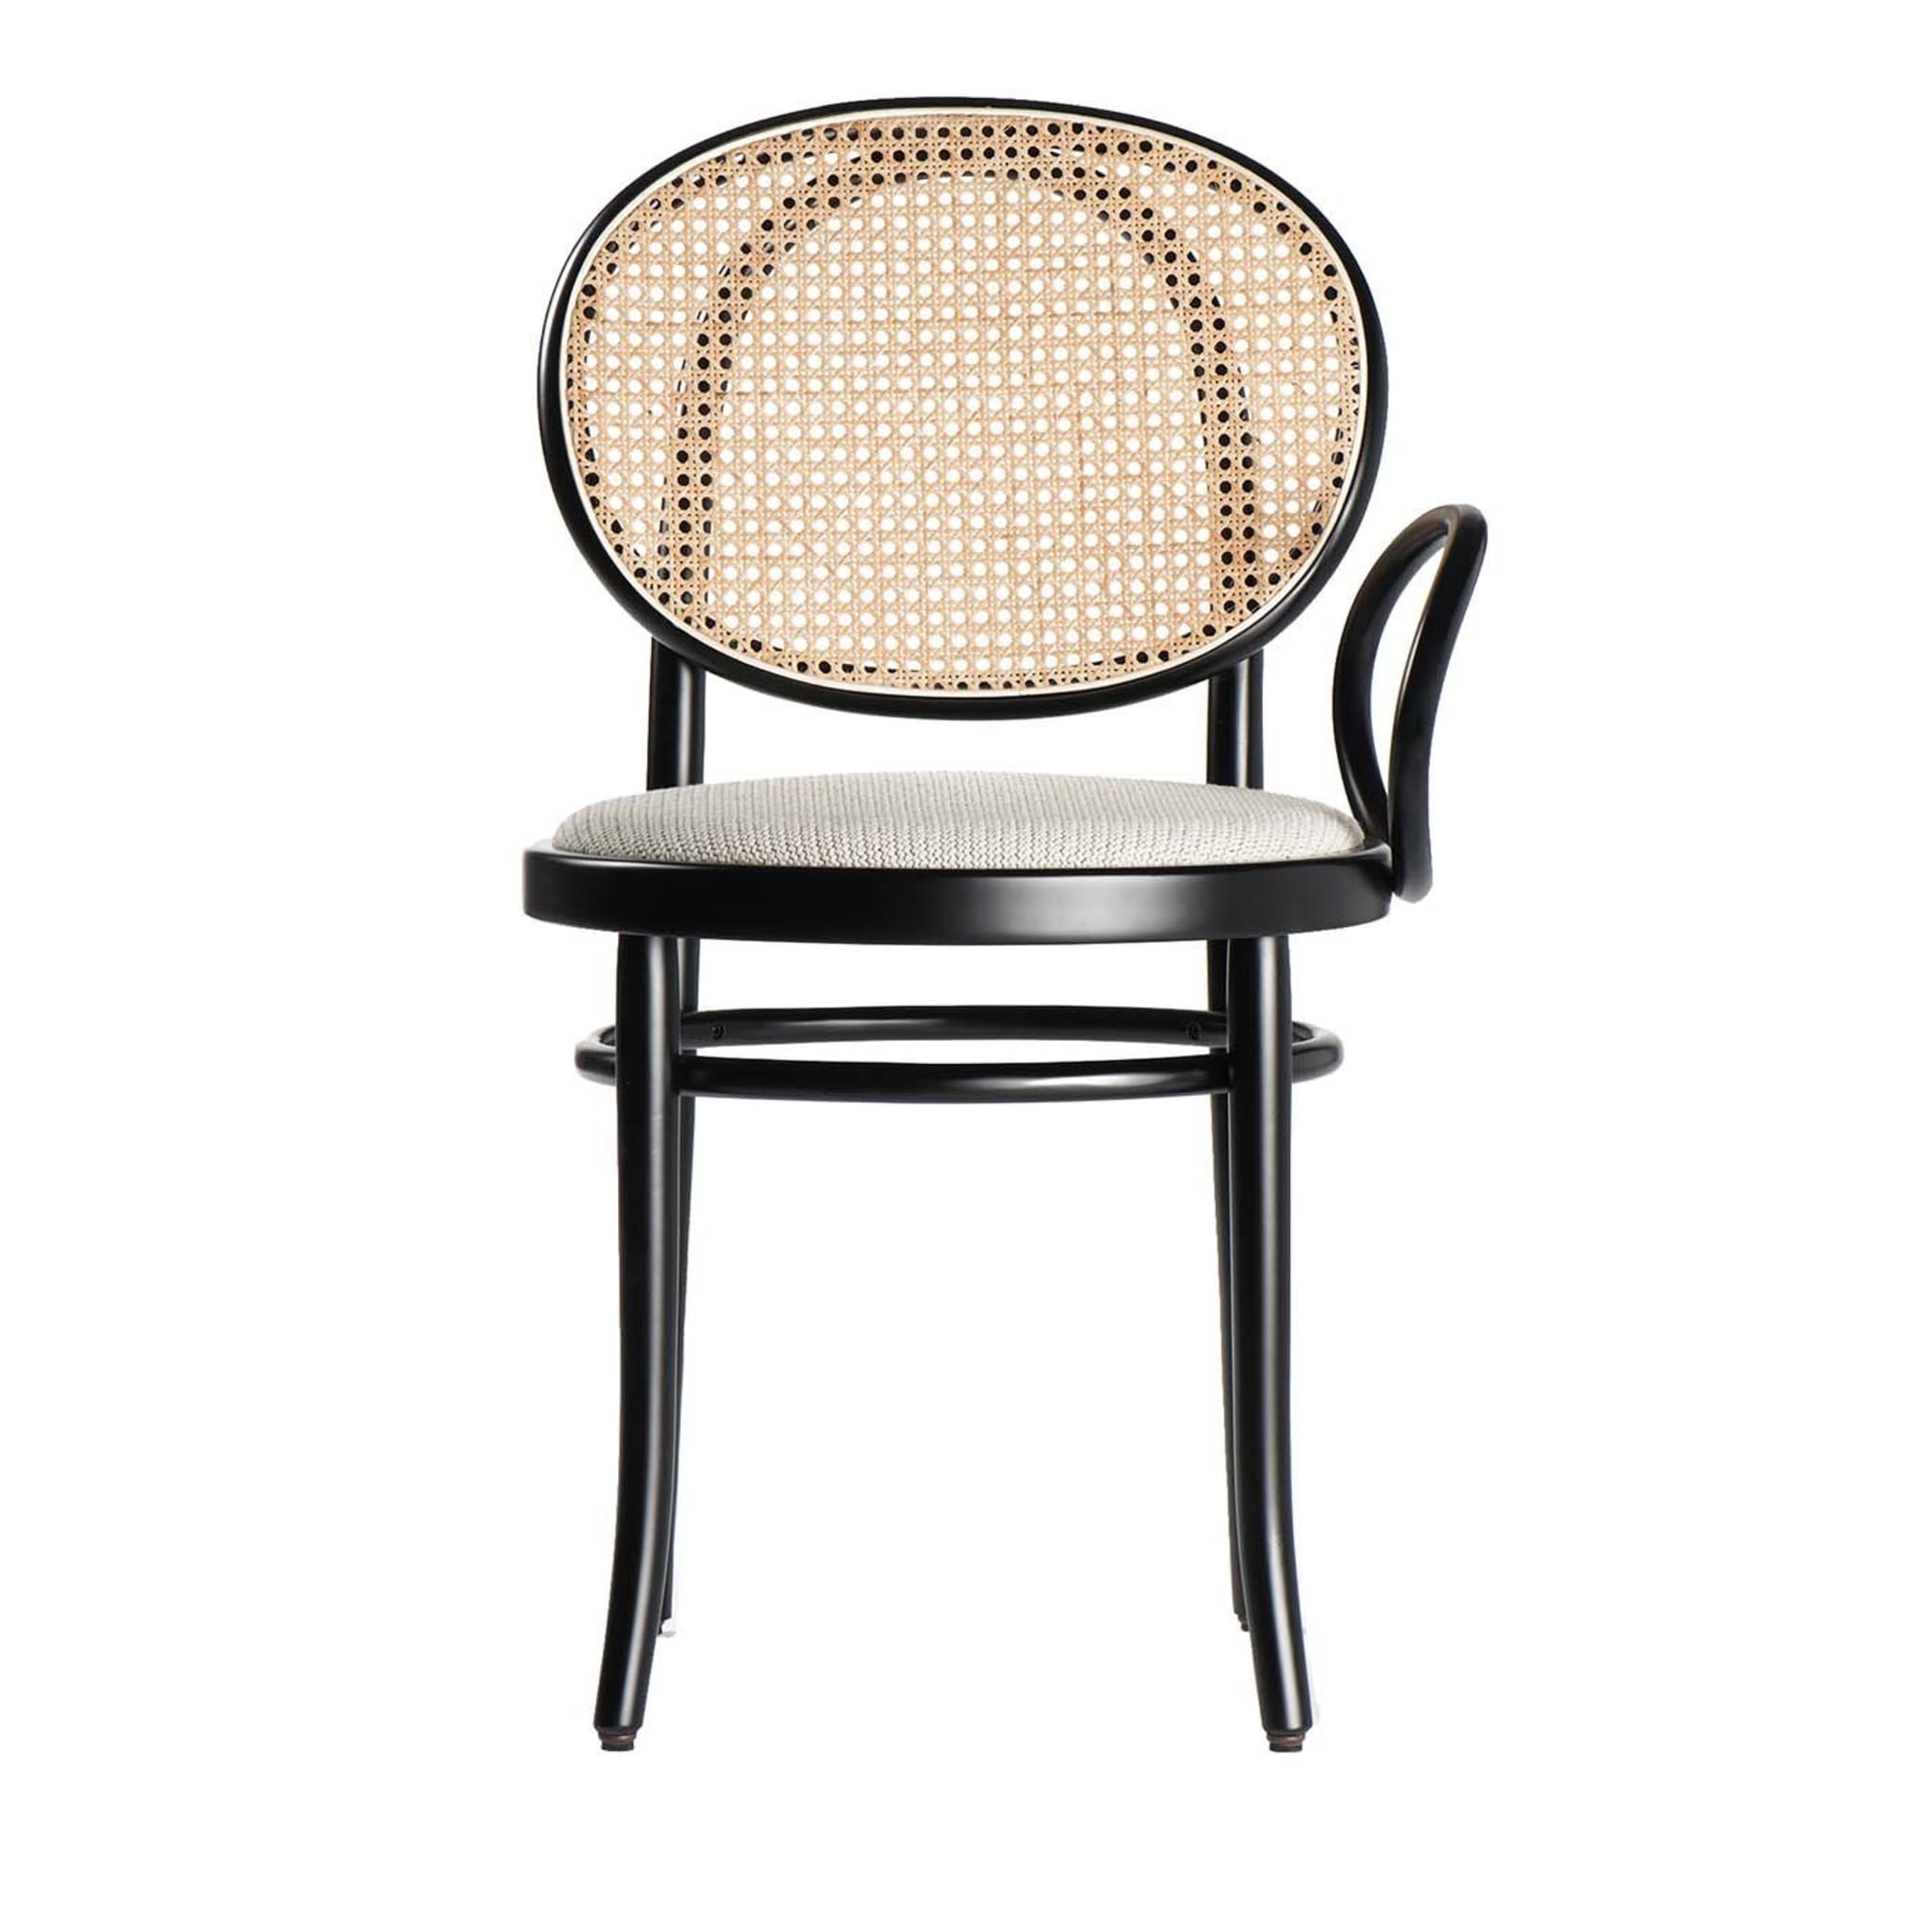 No. 0 Black and White Chair by Front - Vue principale